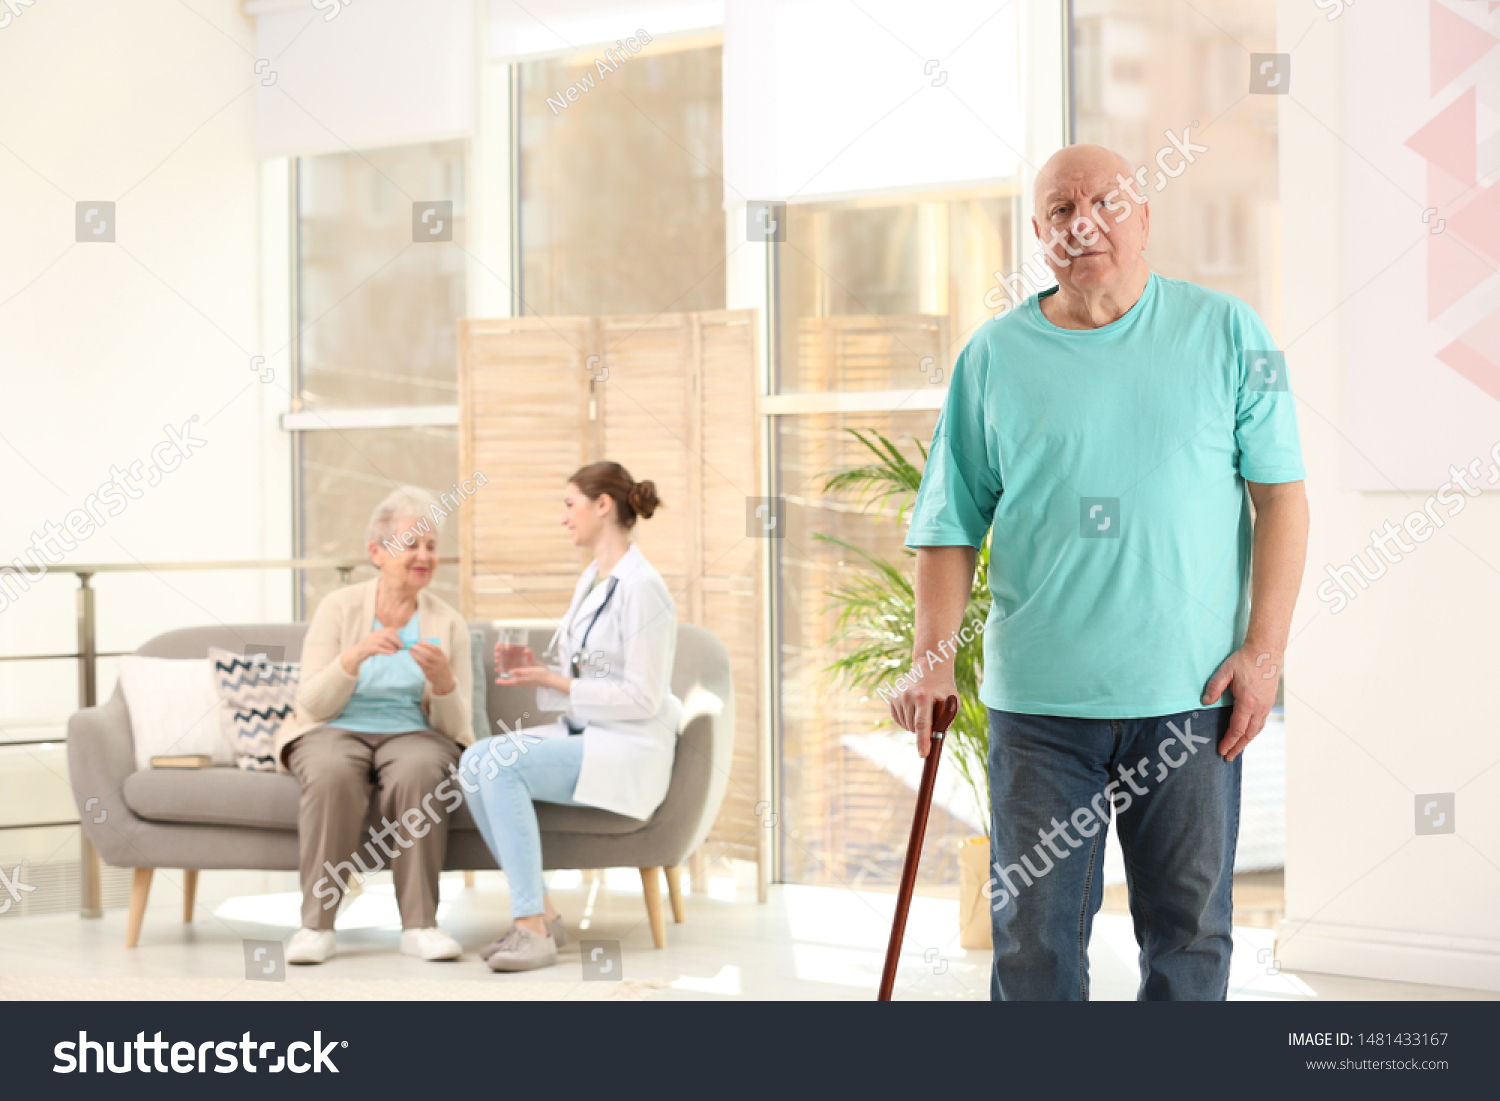 Elderly man with cane in nursing home, space for text. Assisting senior generation #1481433167